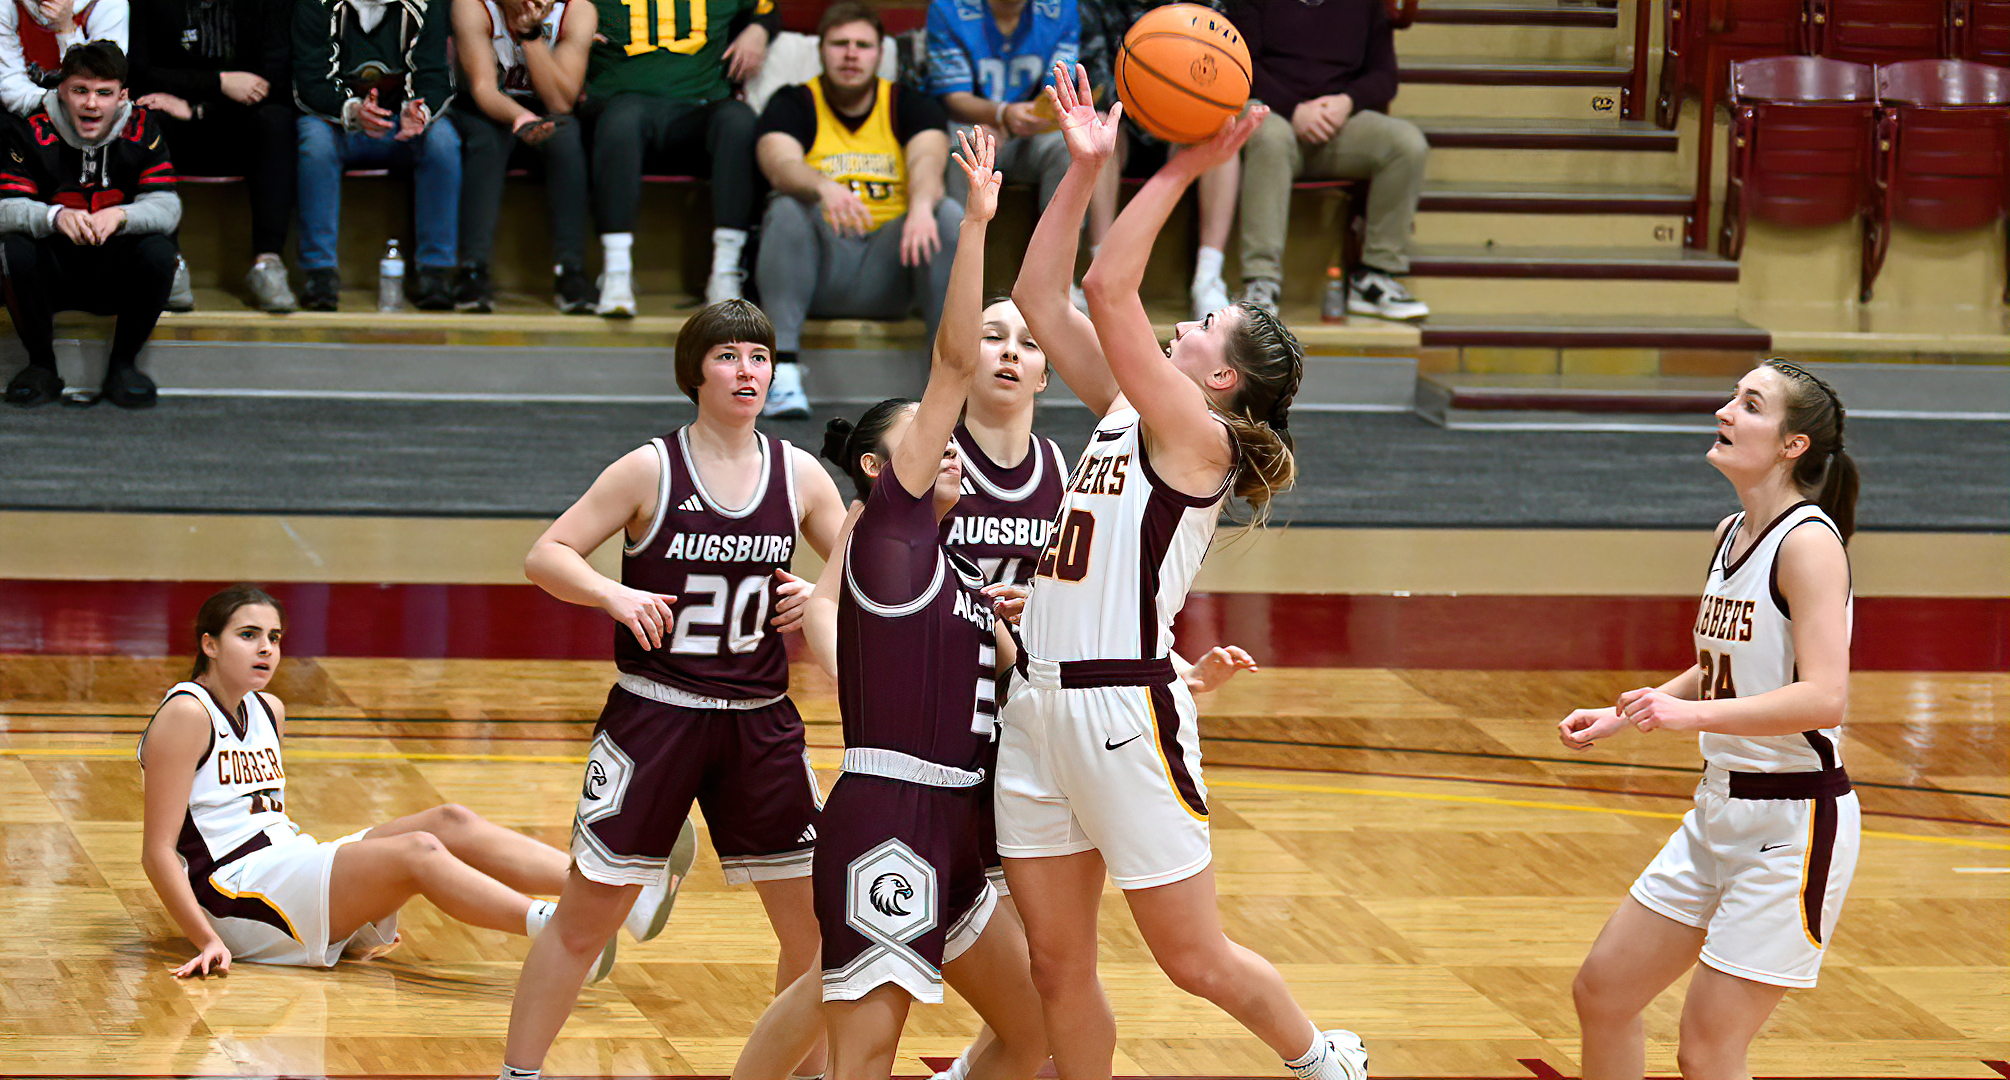 Emily Beseman goes up for the jumper during the second half of the Cobbers' win over Augsburg.